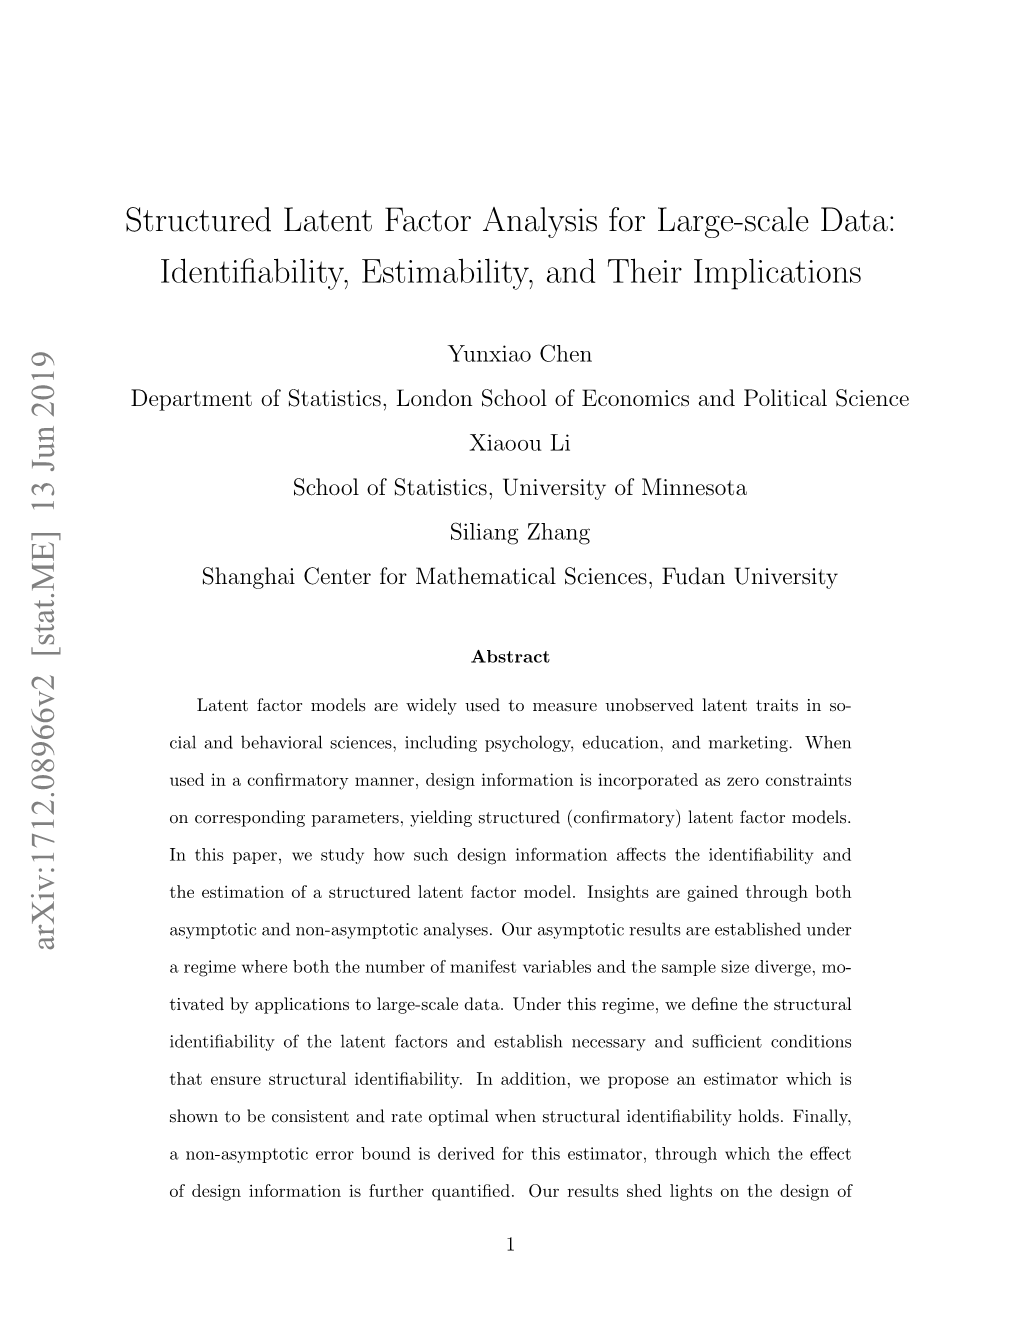 Structured Latent Factor Analysis for Large-Scale Data: Identiﬁability, Estimability, and Their Implications